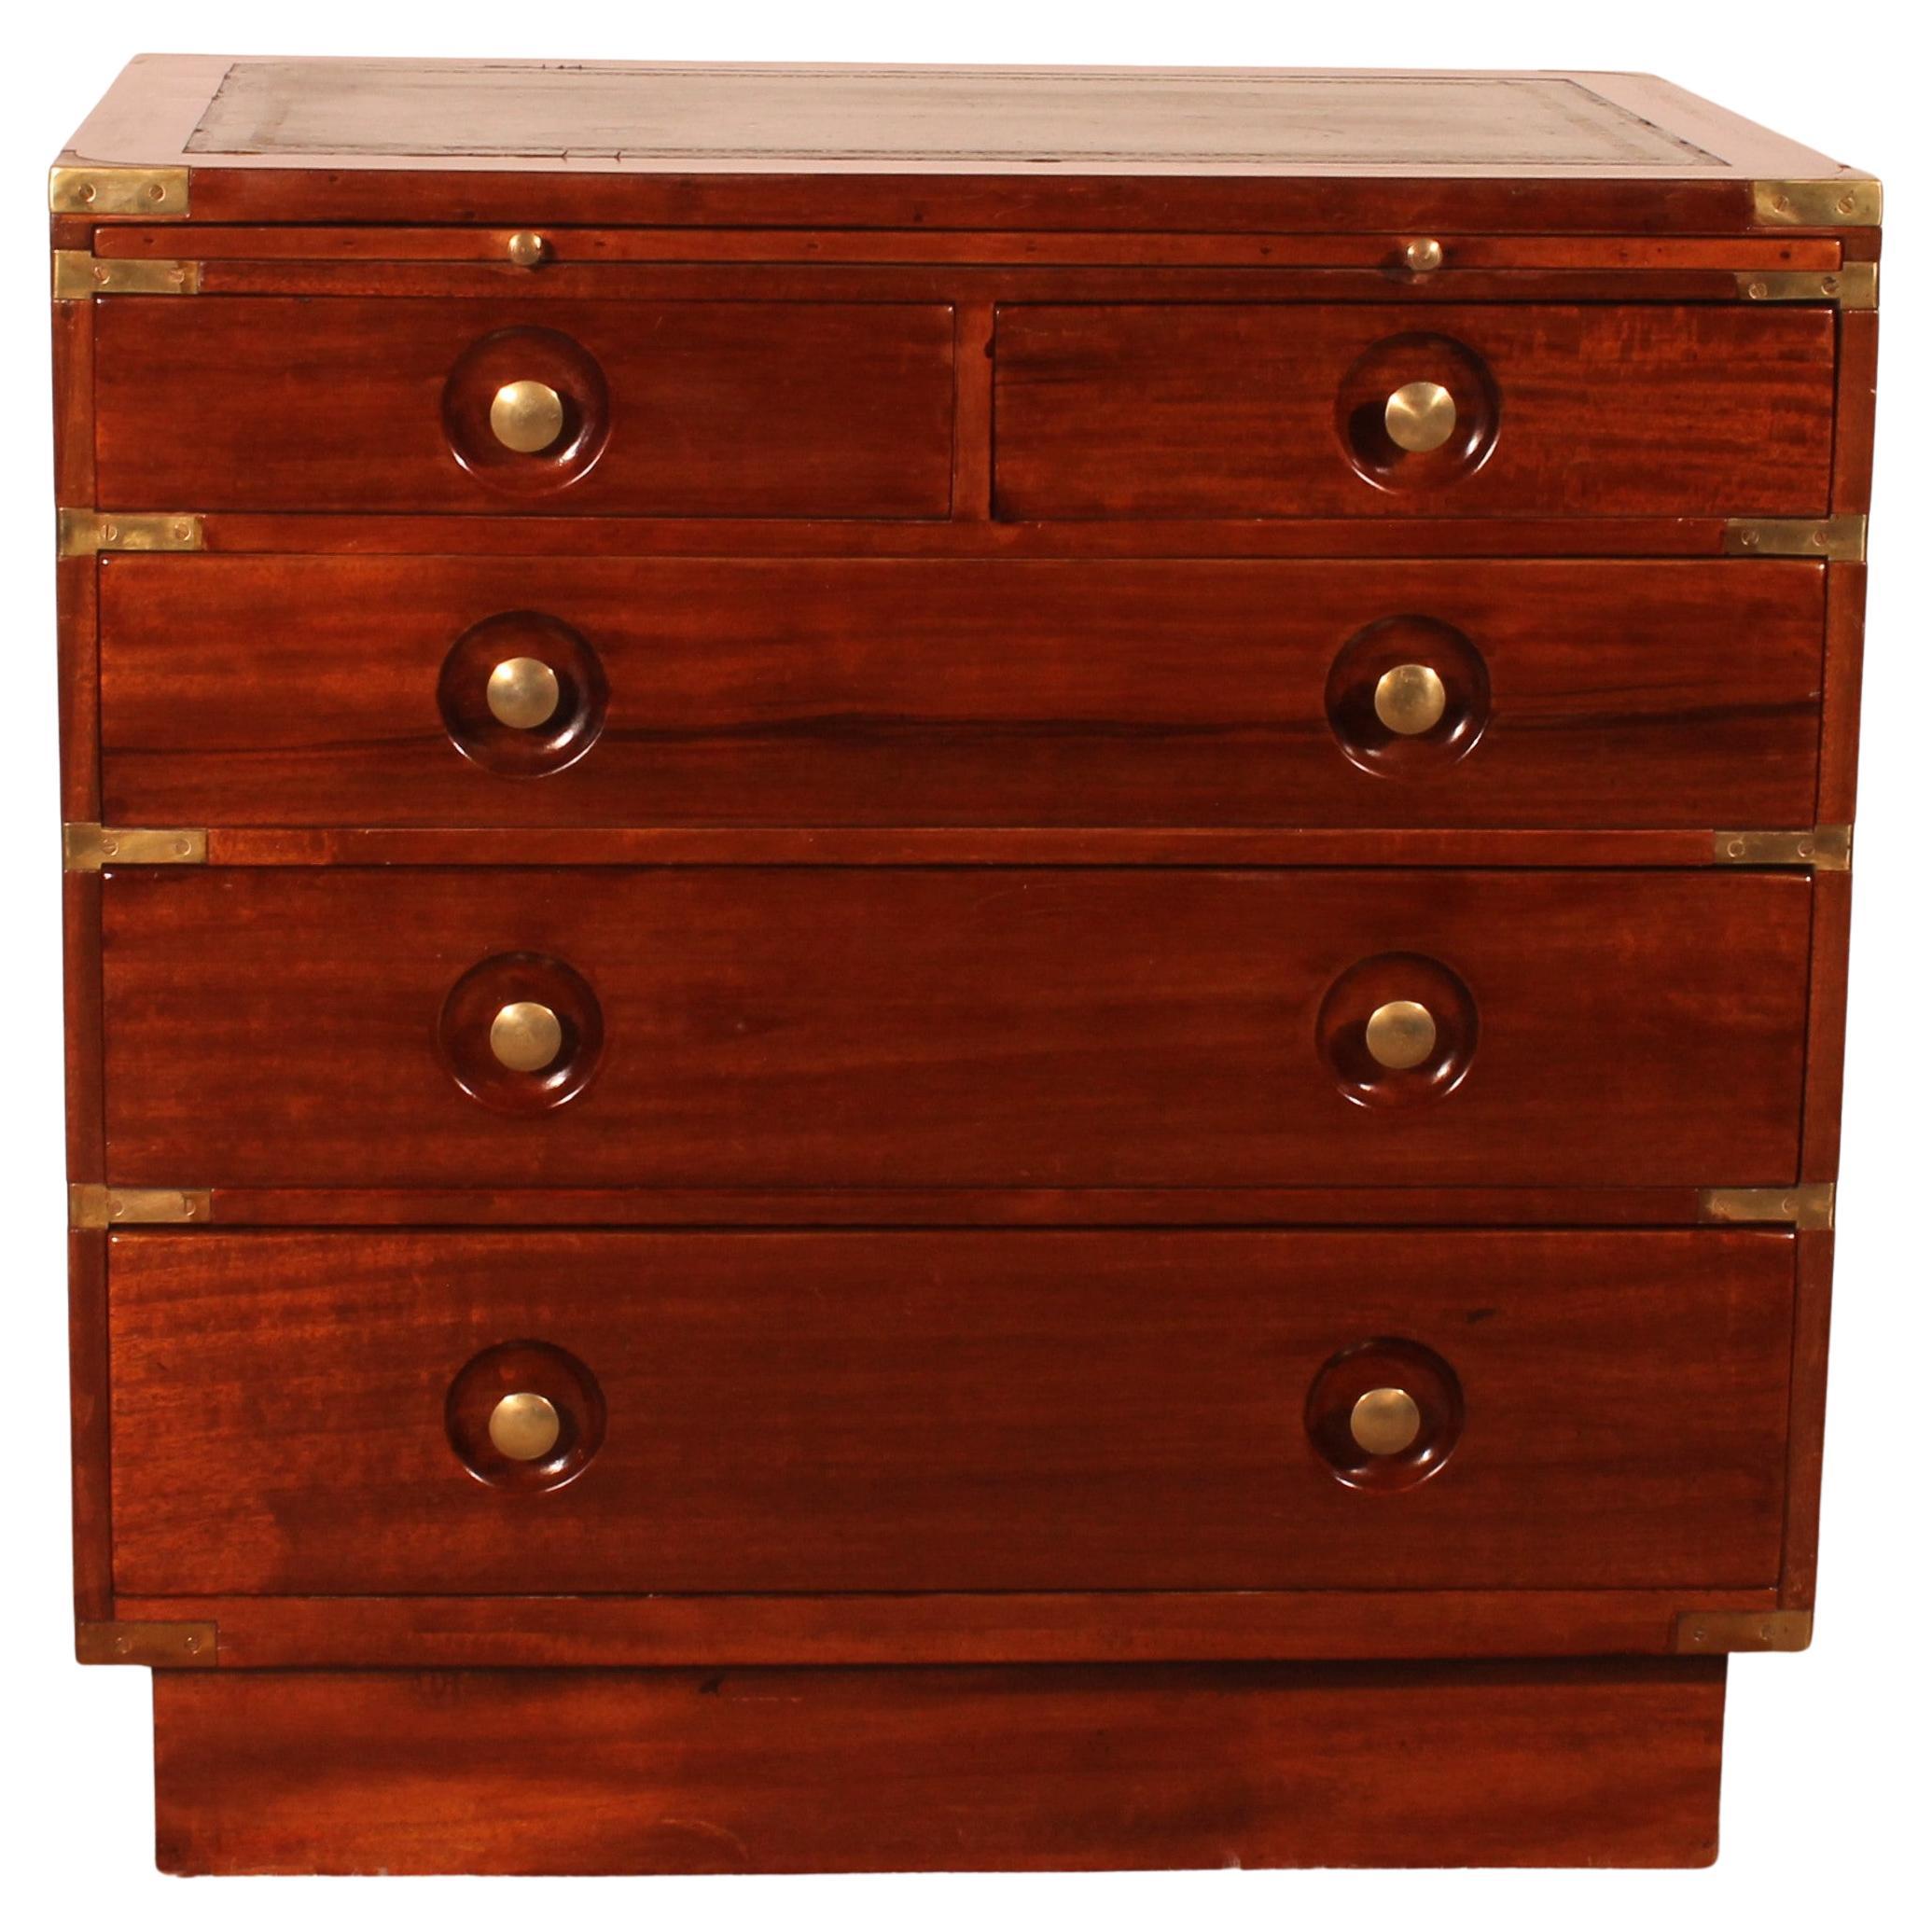 Mahogany Marine / Campaign Chest Of Drawers Of A Cruise Liner